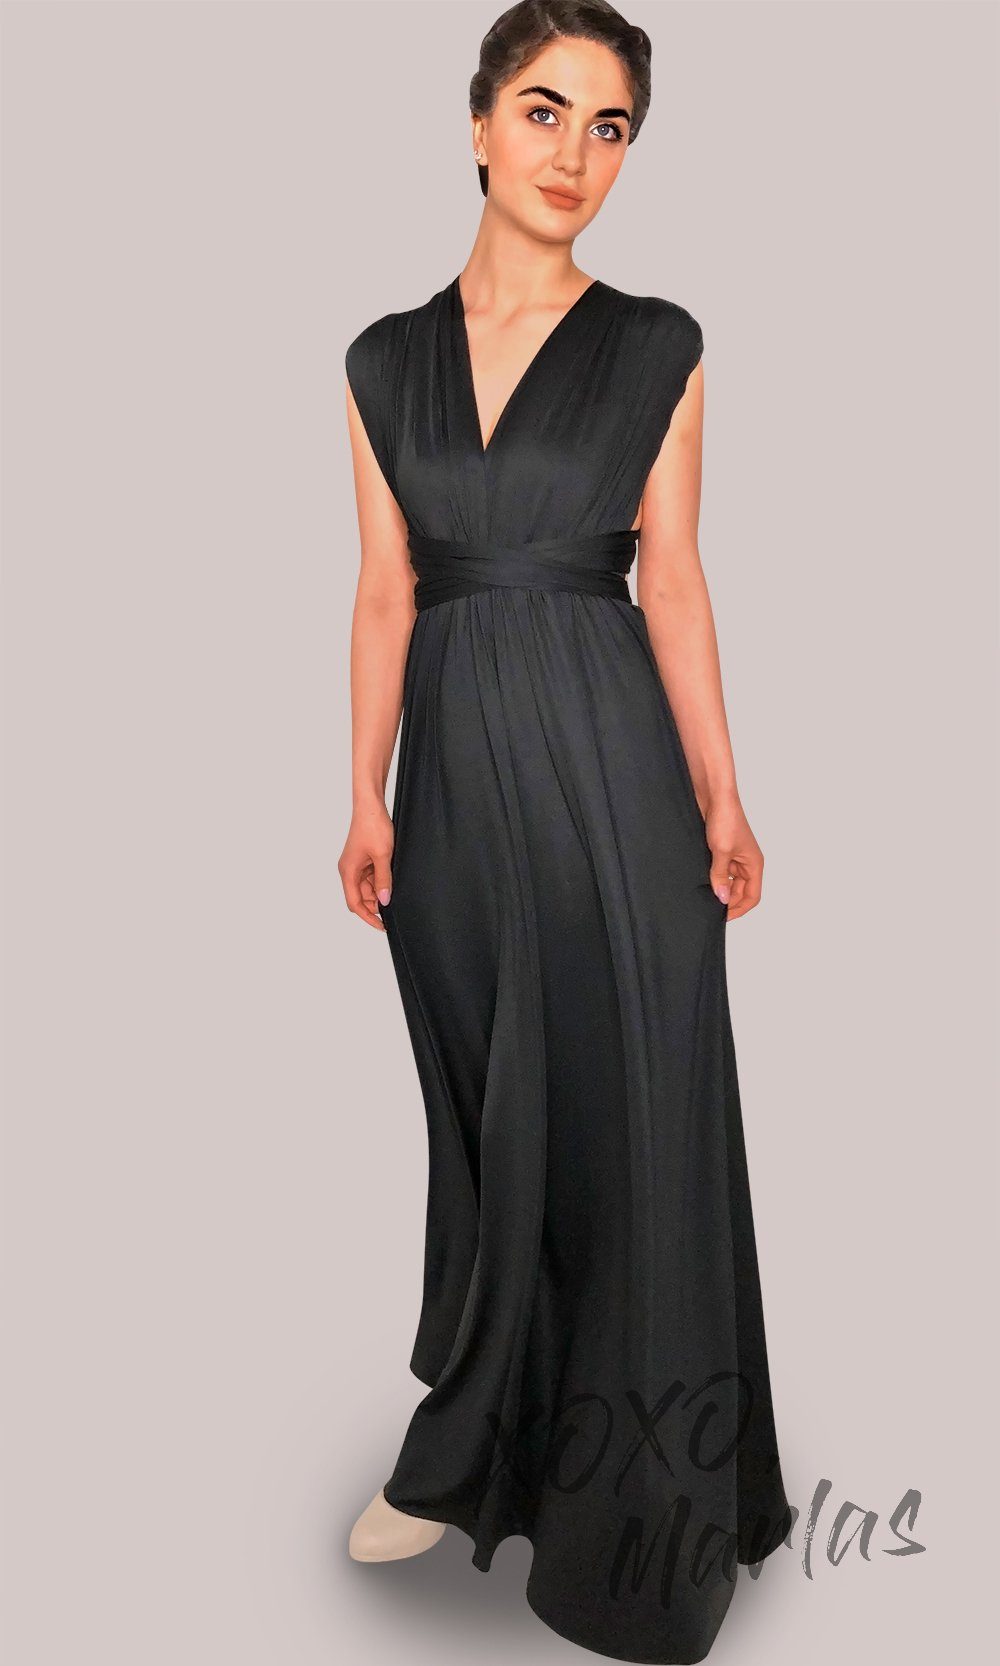 Long Black infinity bridesmaid dress or multiway dress or convertible dress.One dress worn in multiple ways. This black one size dress is perfect for bridesmaid, prom, destination wedding, gala, cheap western party dress, semi formal, cocktail